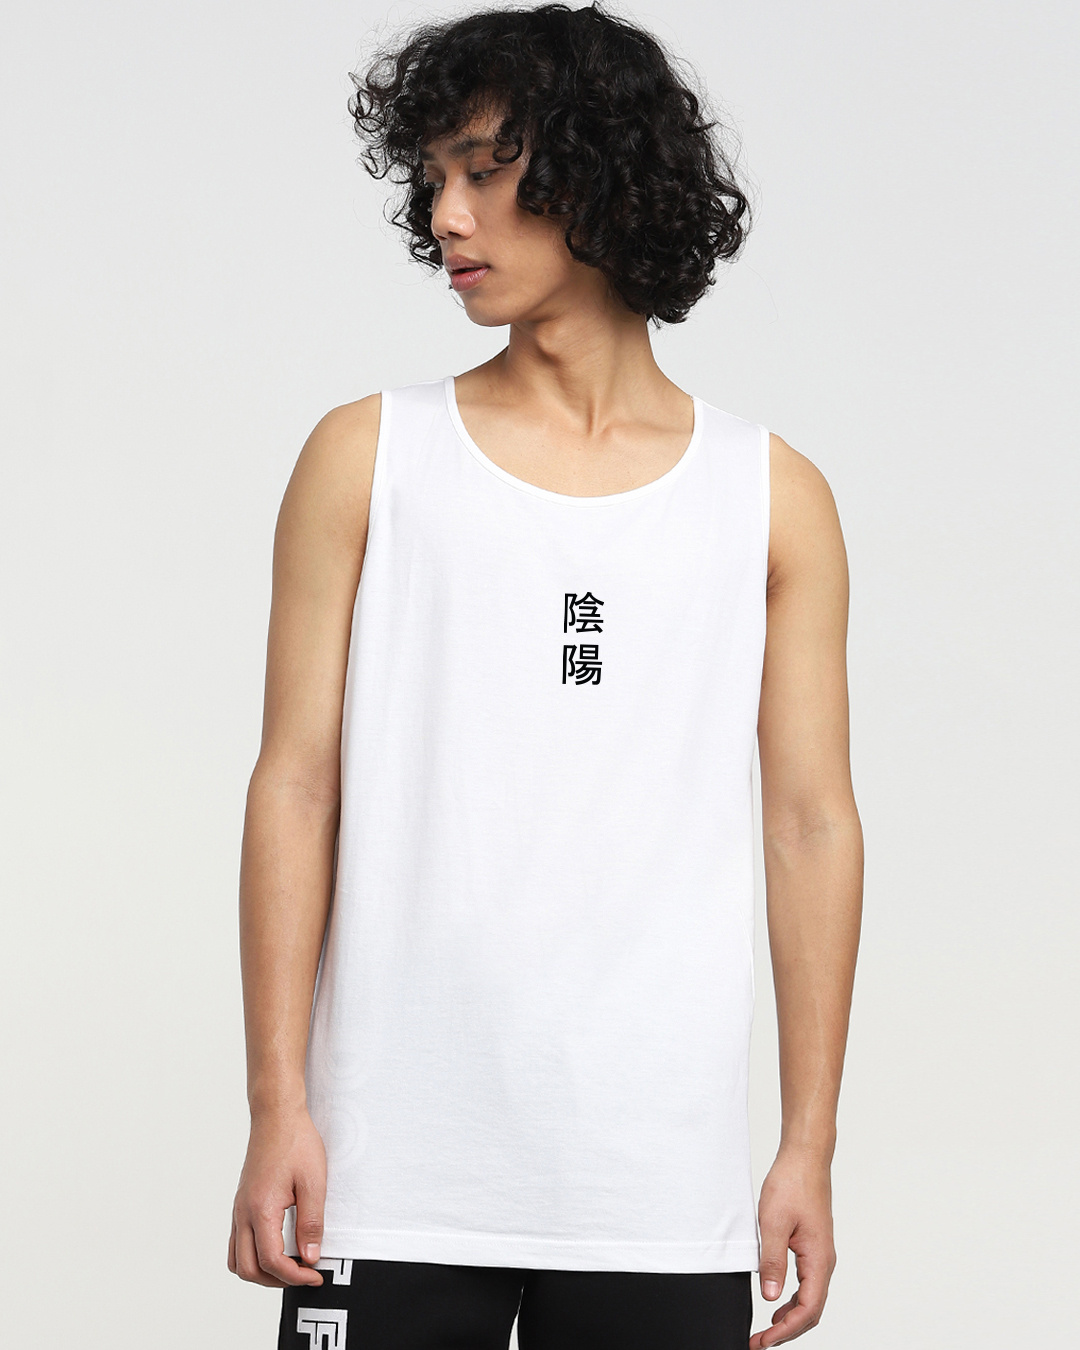 Shop Men's White Order in Chaos Graphic Printed Vest-Back